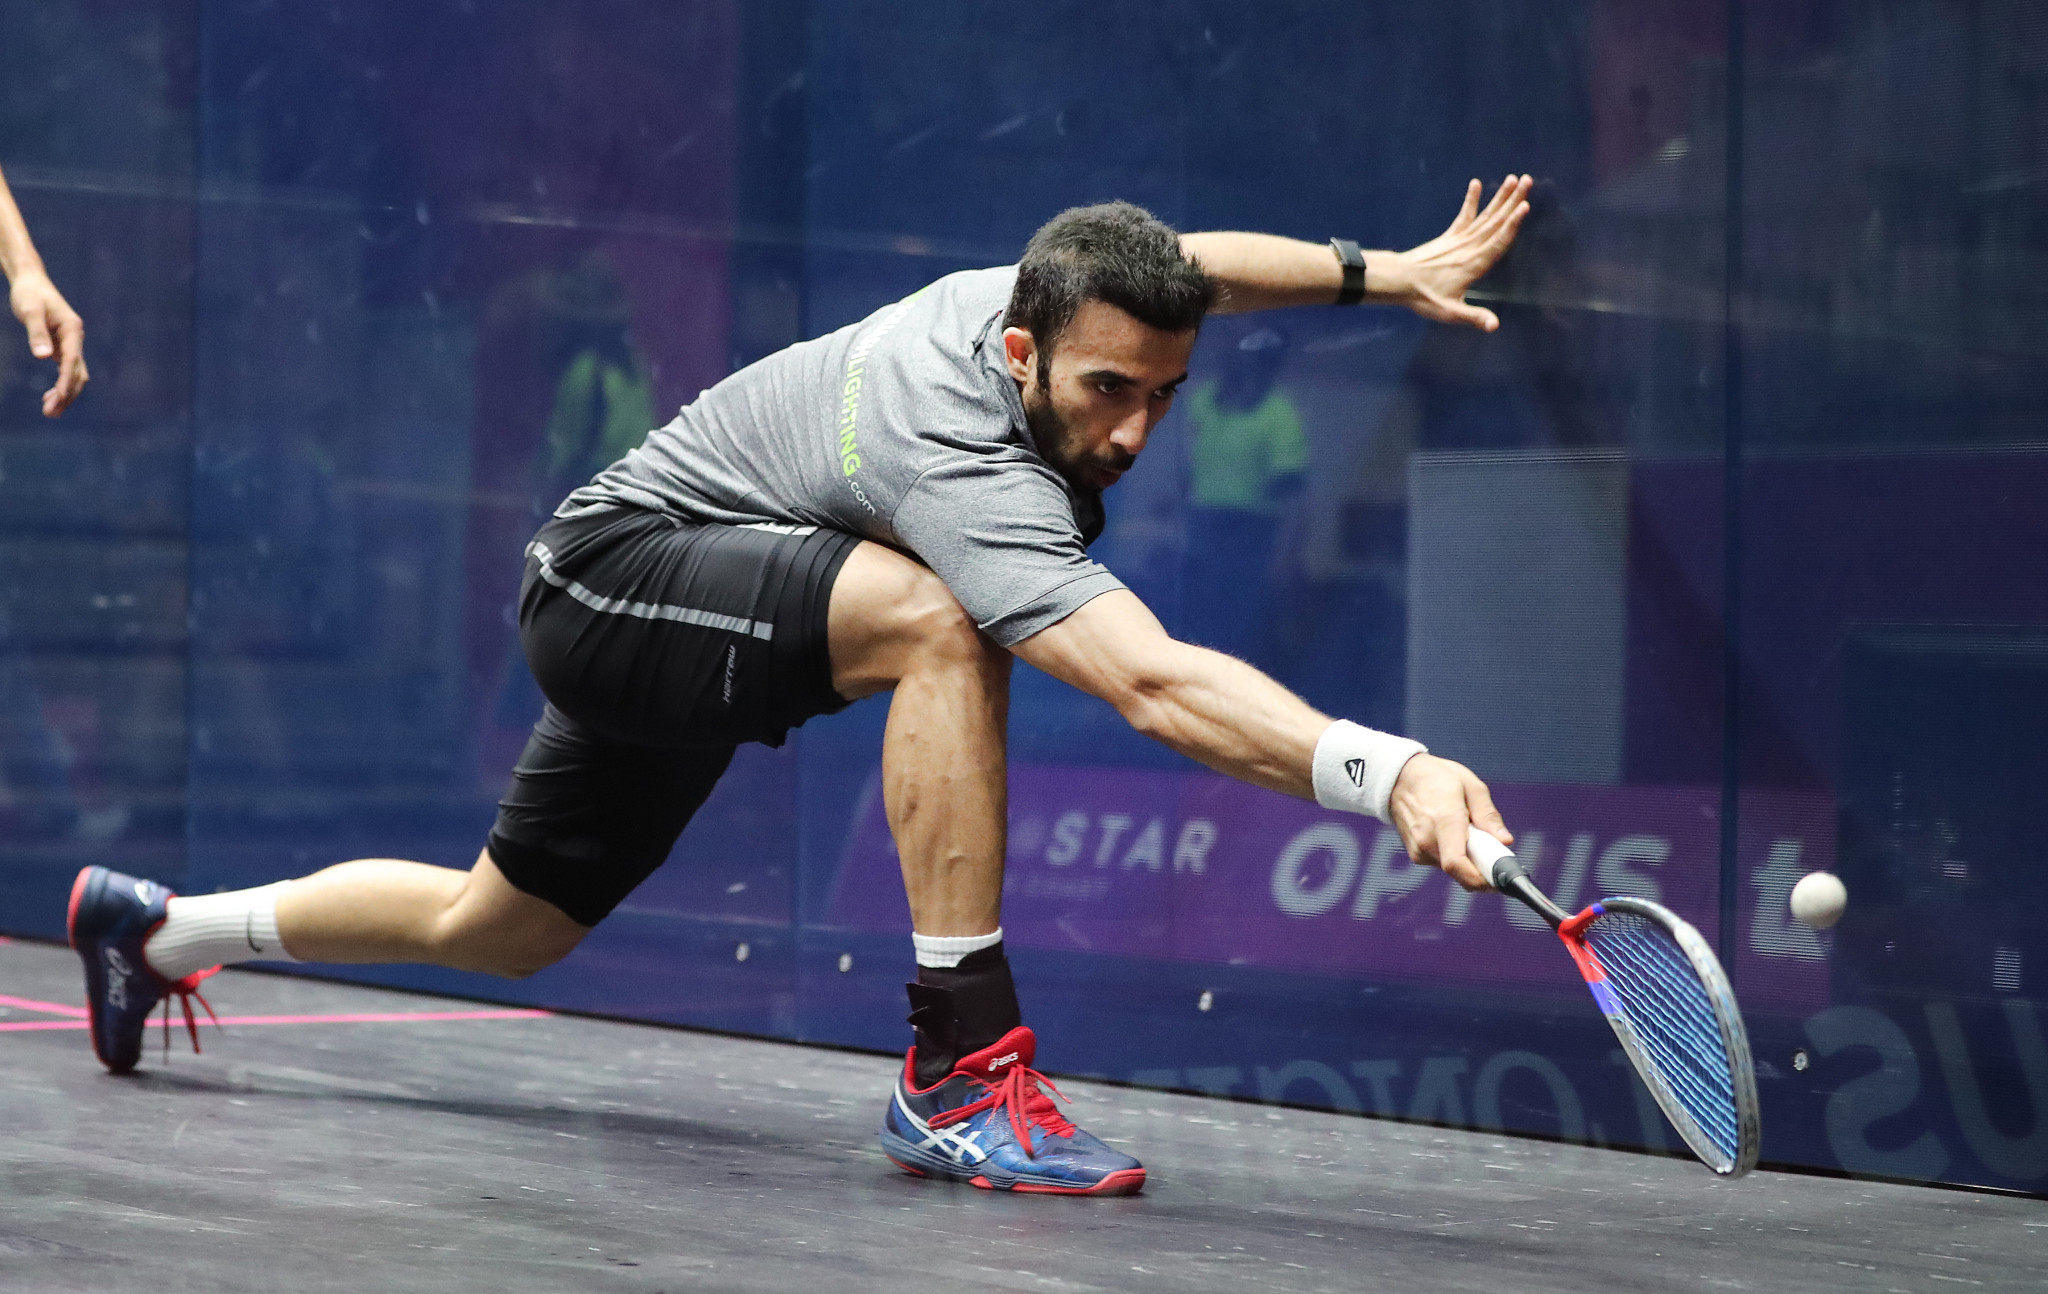 Professional Squash Association live video content to feature on FeedConstruct